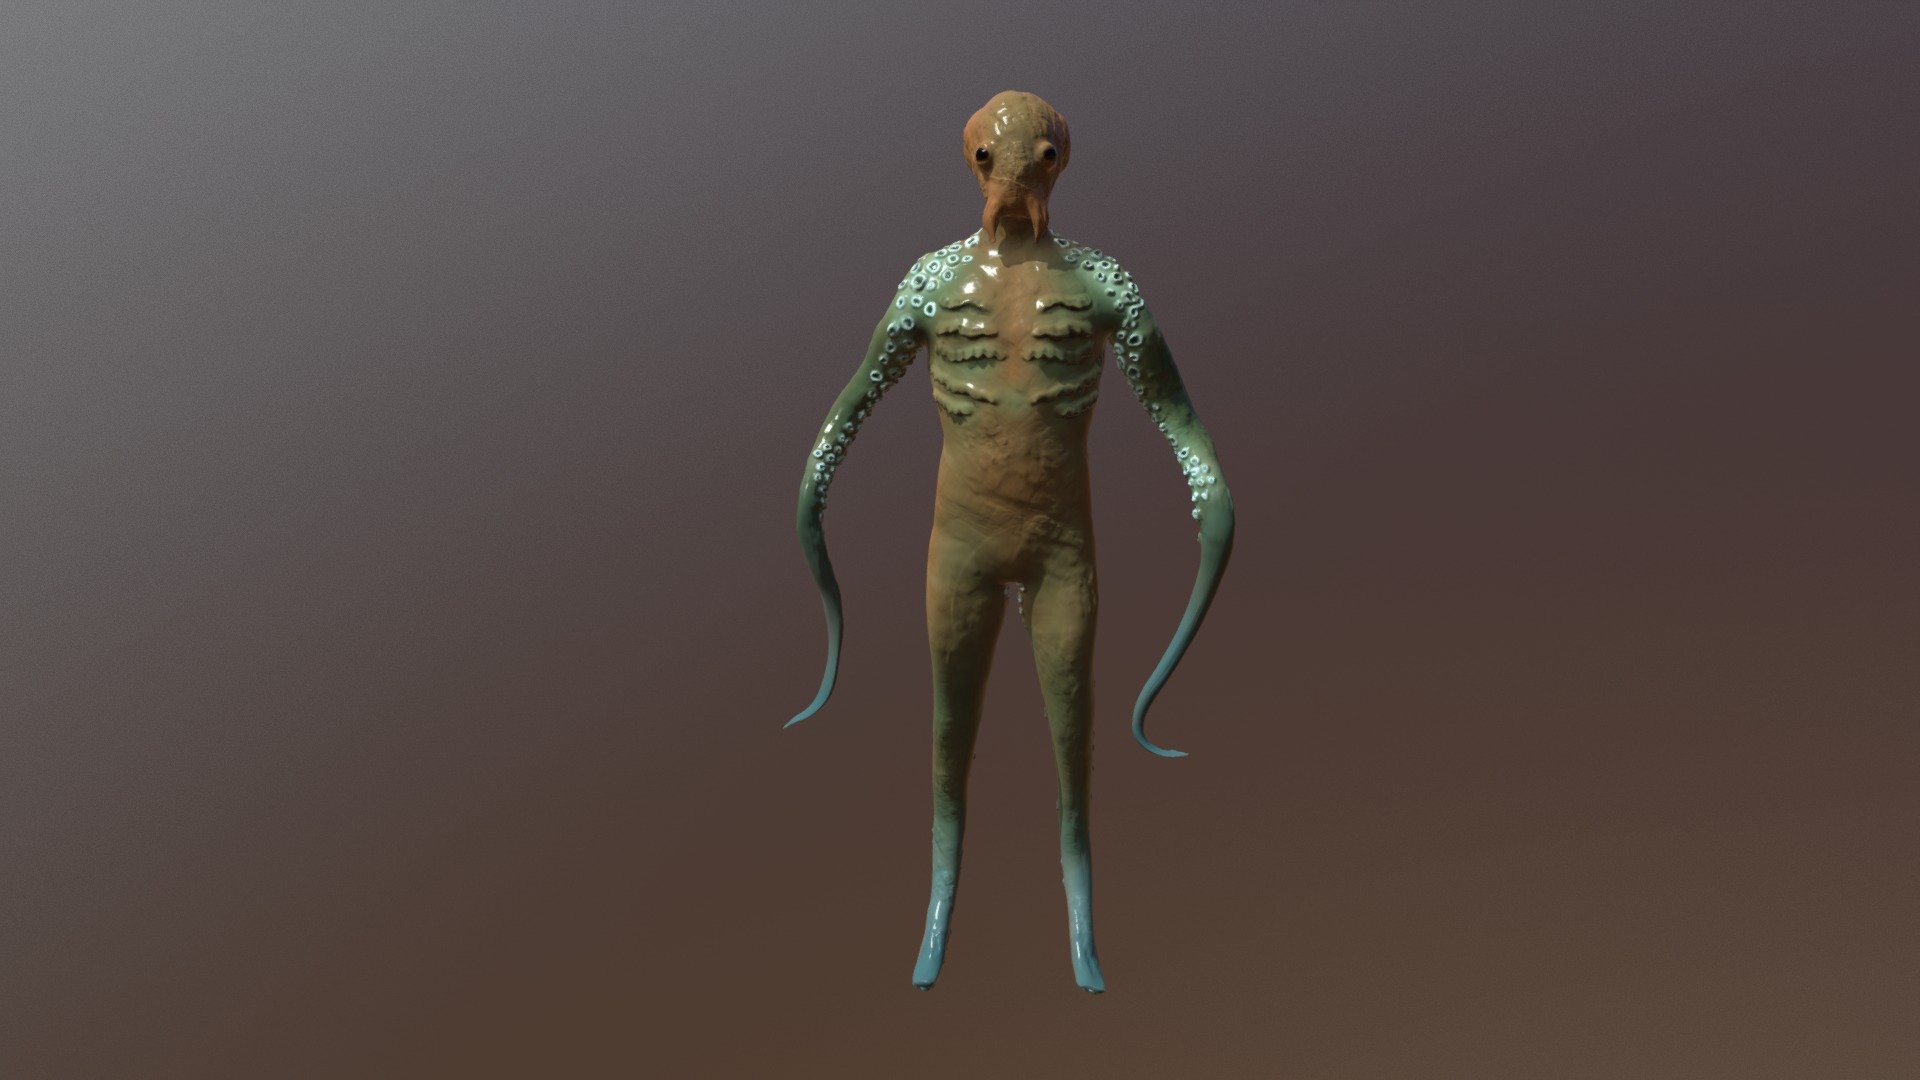 I made this for my portfolio. It's my first 3D model, and I look forward to making more. Its an octopus-man hybrid. Could be used for the horror genre, or an indie sea related game 3d model